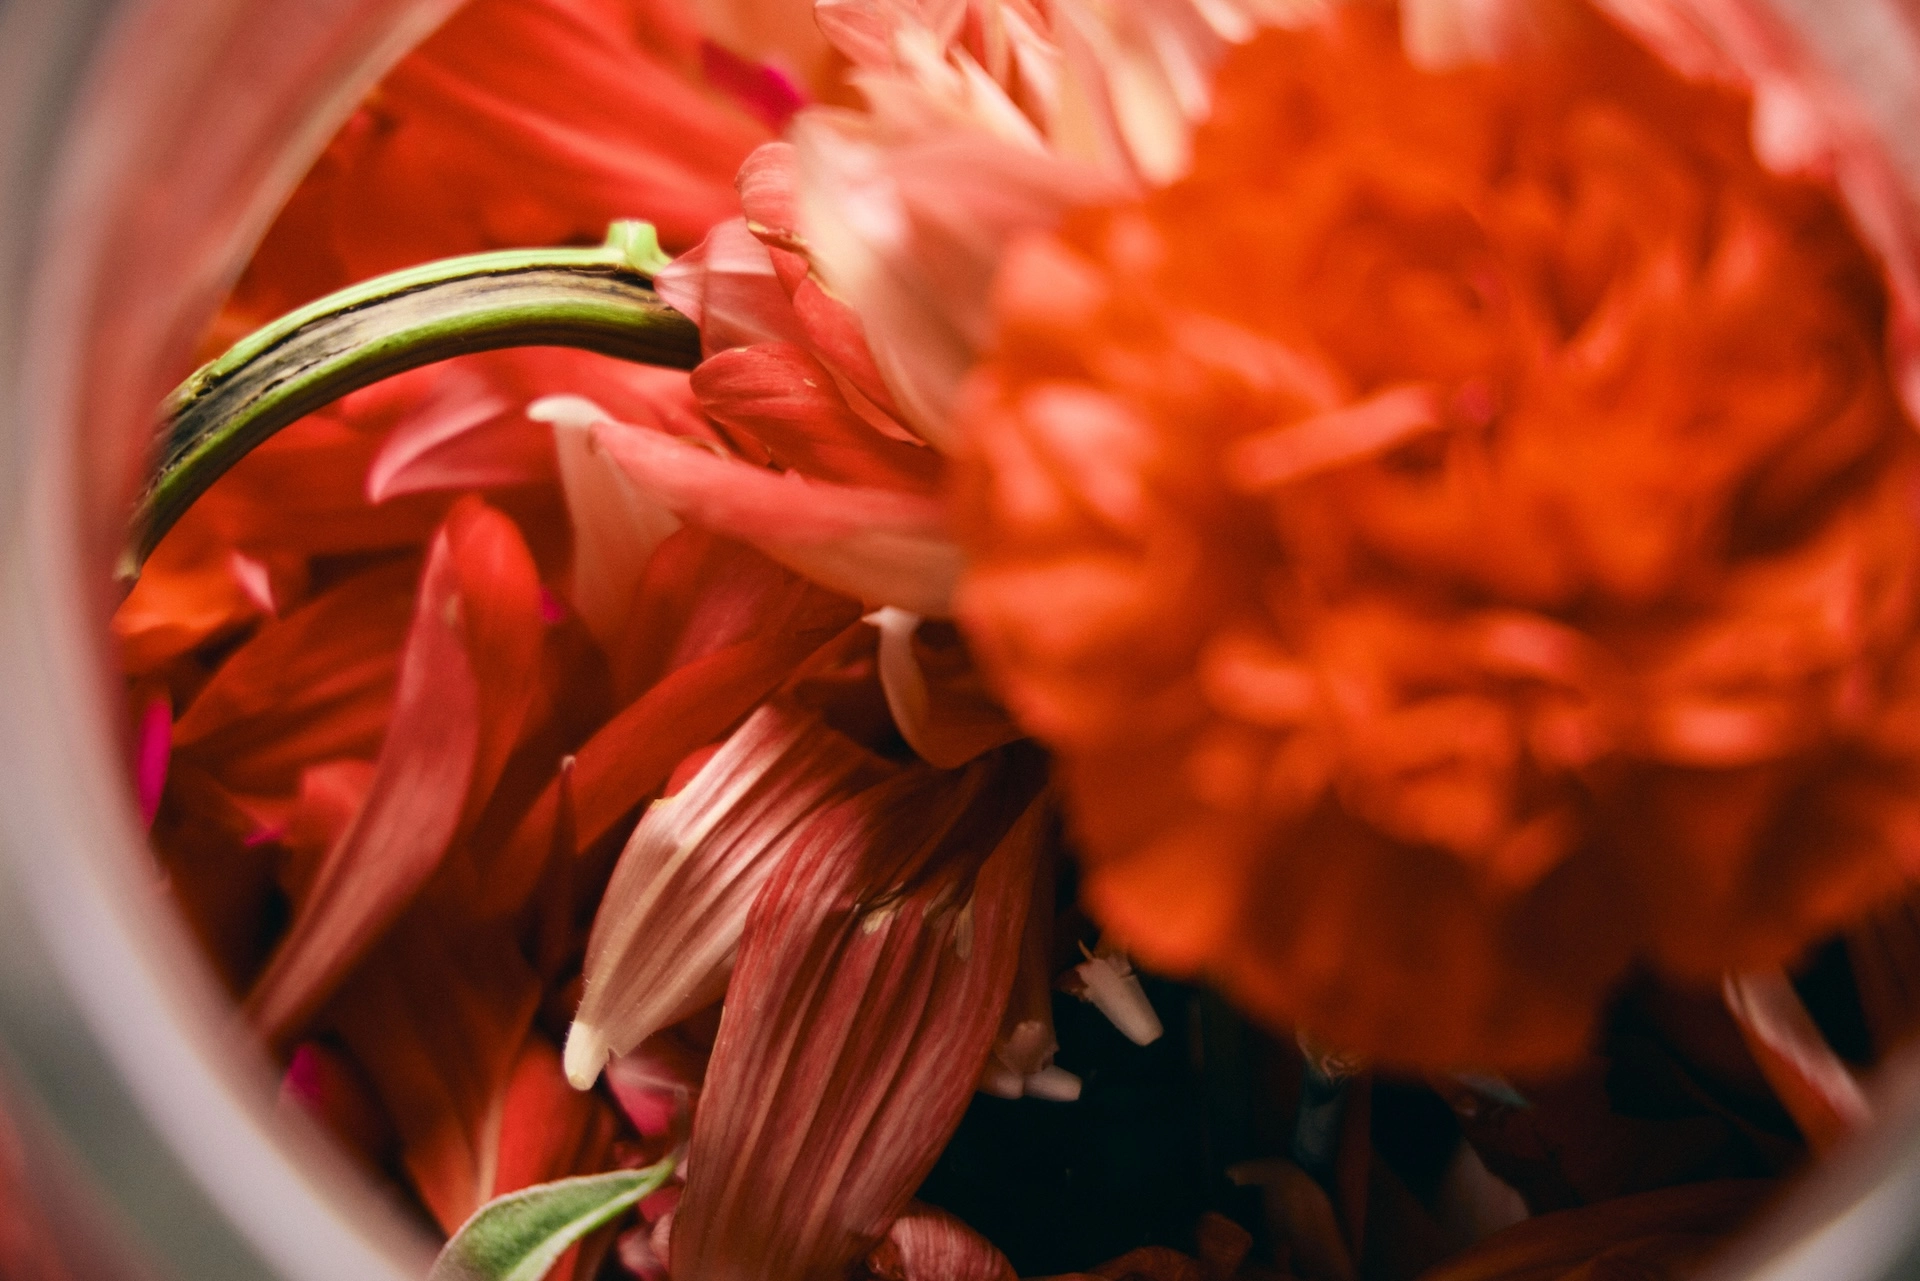 Close-up photo of an arrangement of red flowers filling a glass vessel.